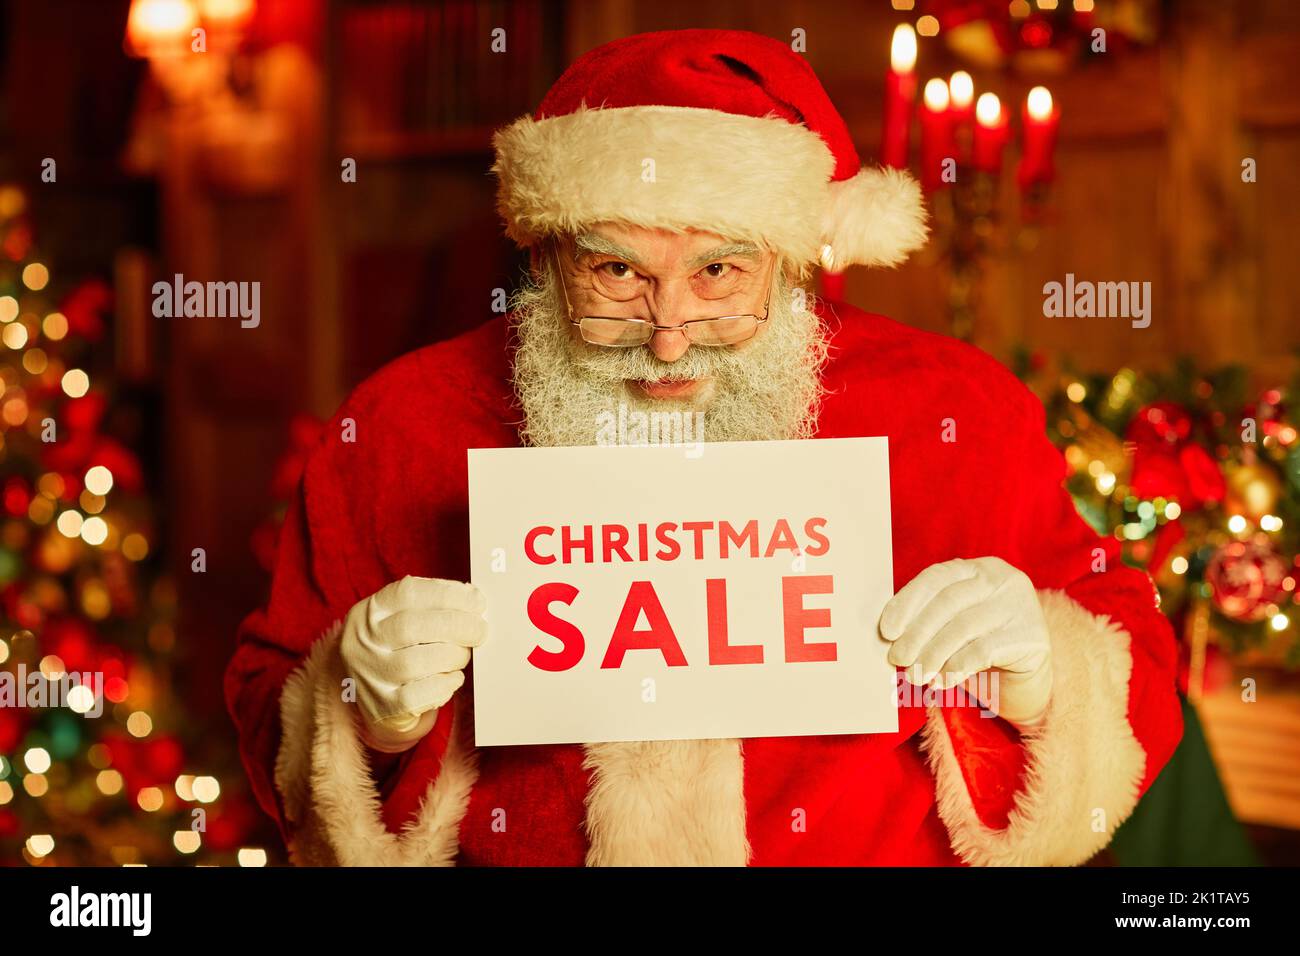 Waist up portrait of traditional Santa Claus holding Christmas SALE sign while standing in decorated room Stock Photo